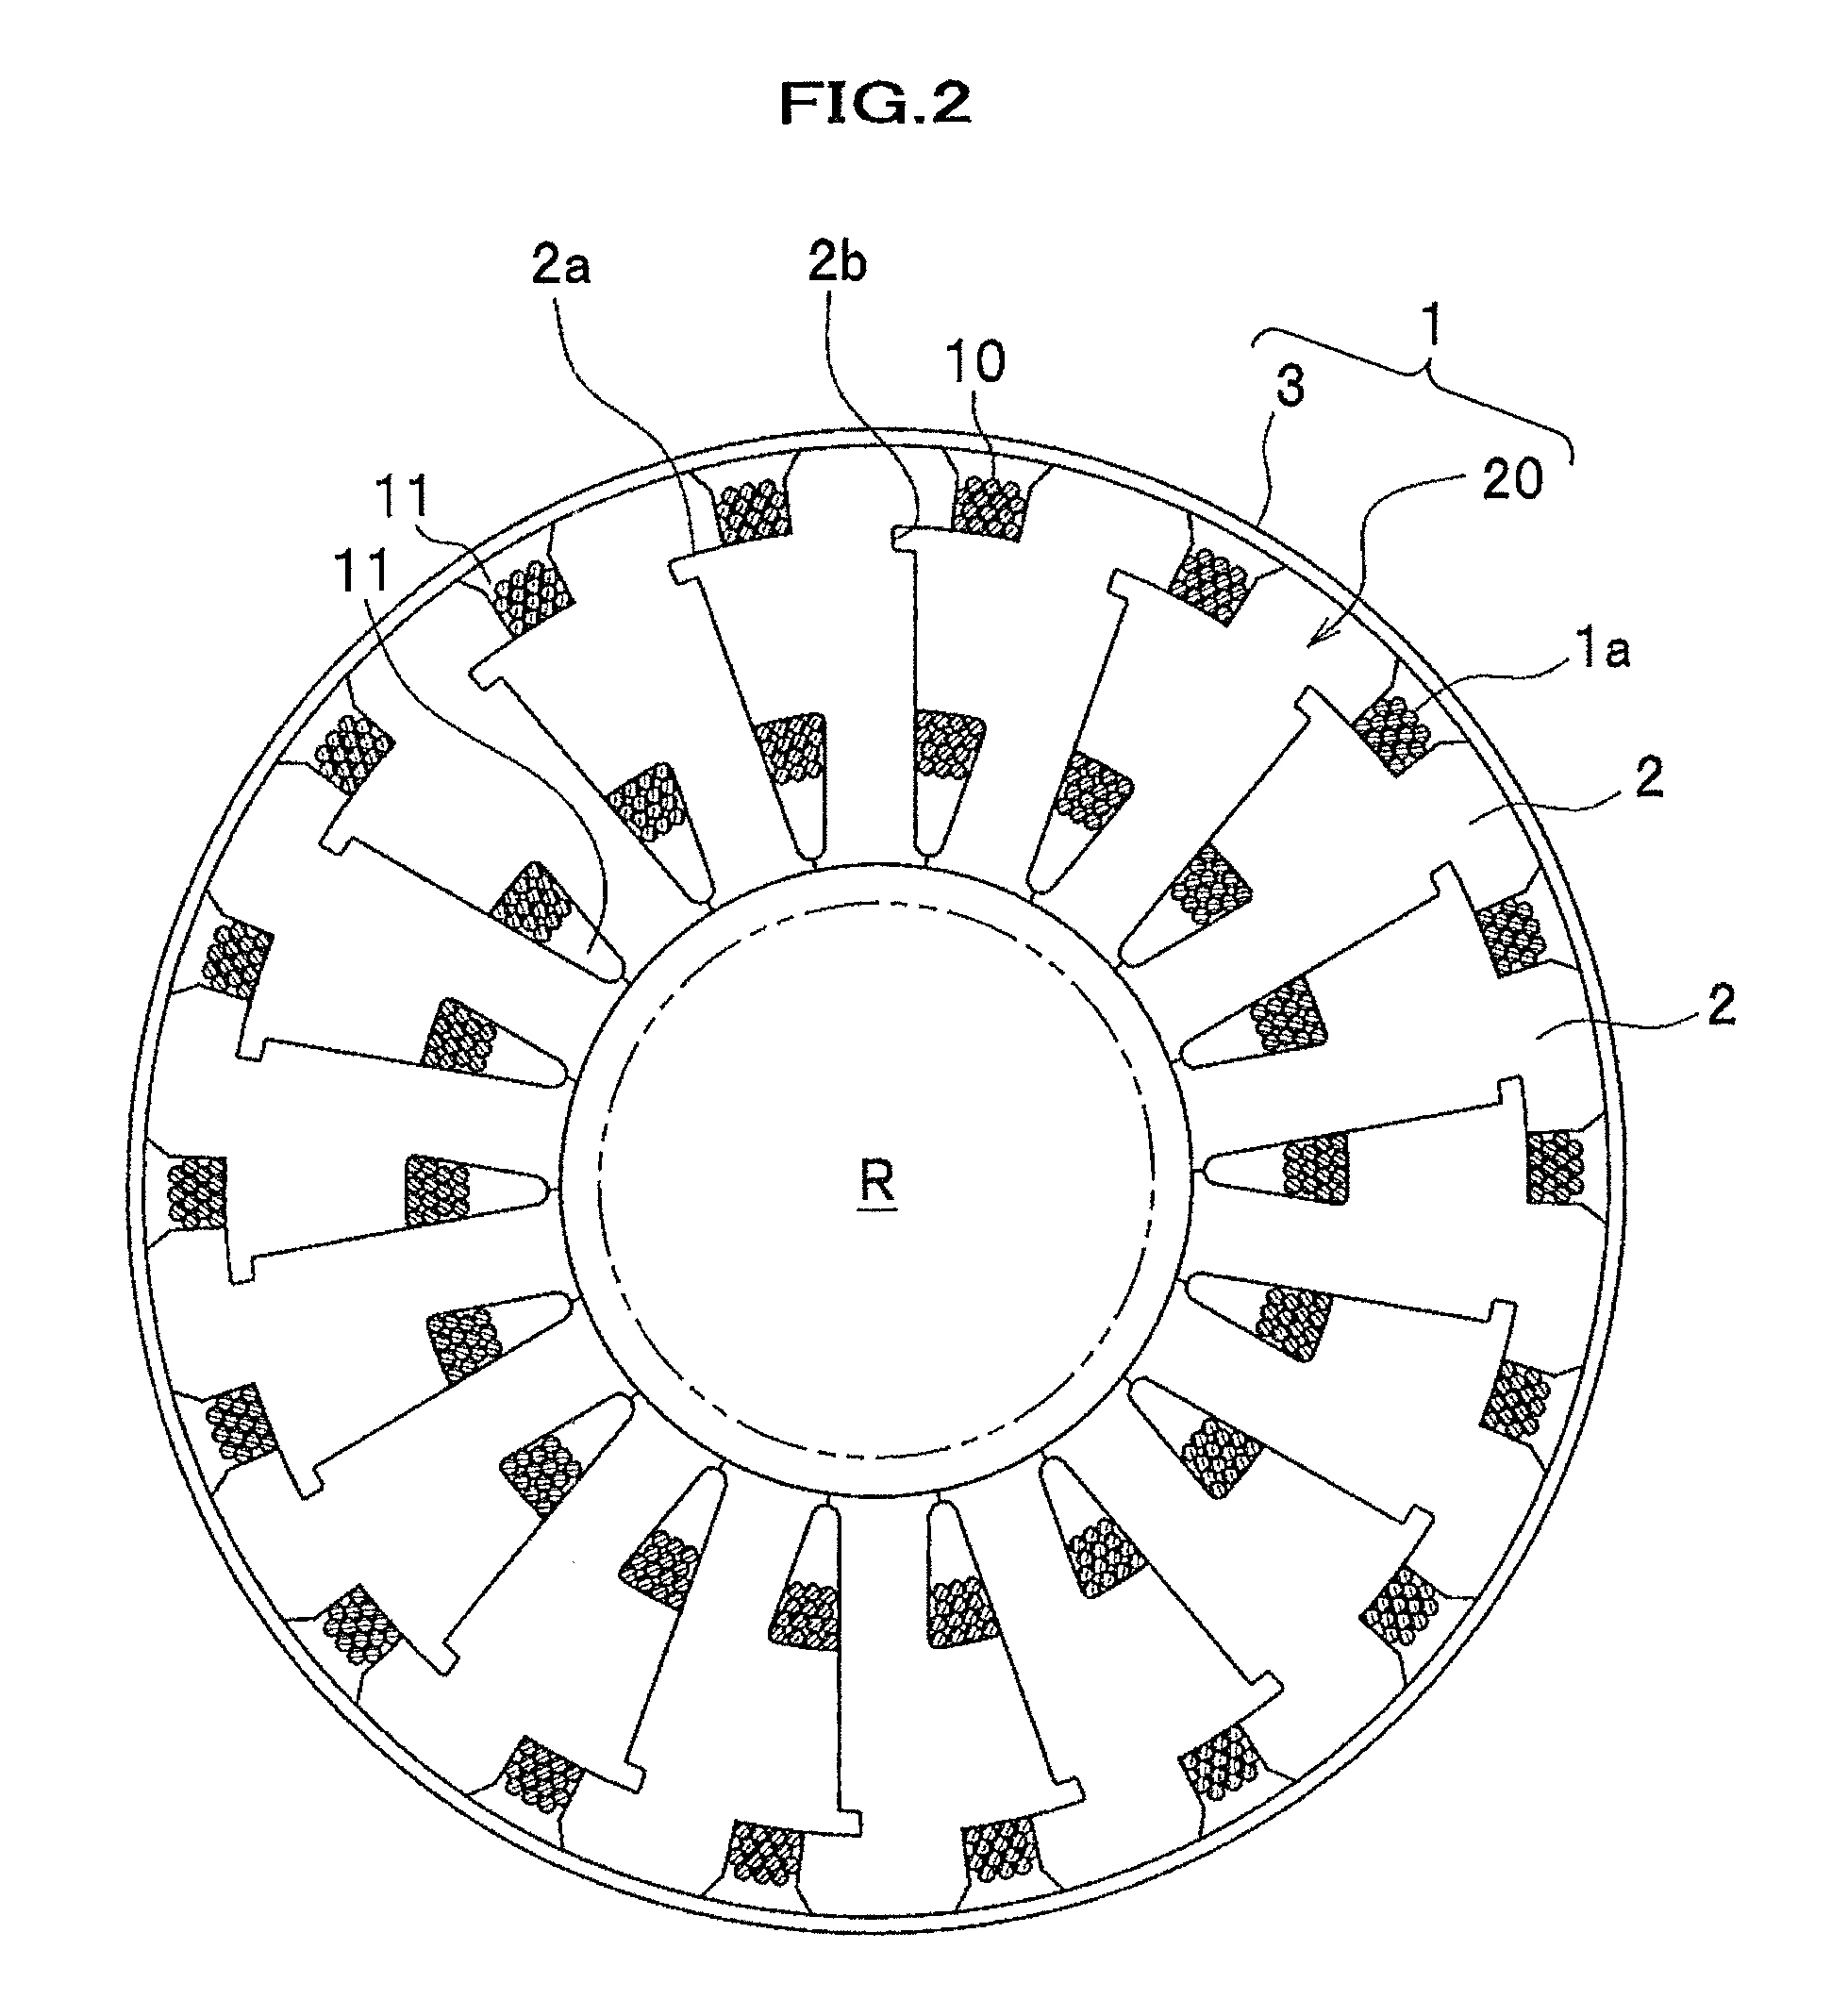 Stator for electrical rotating machine